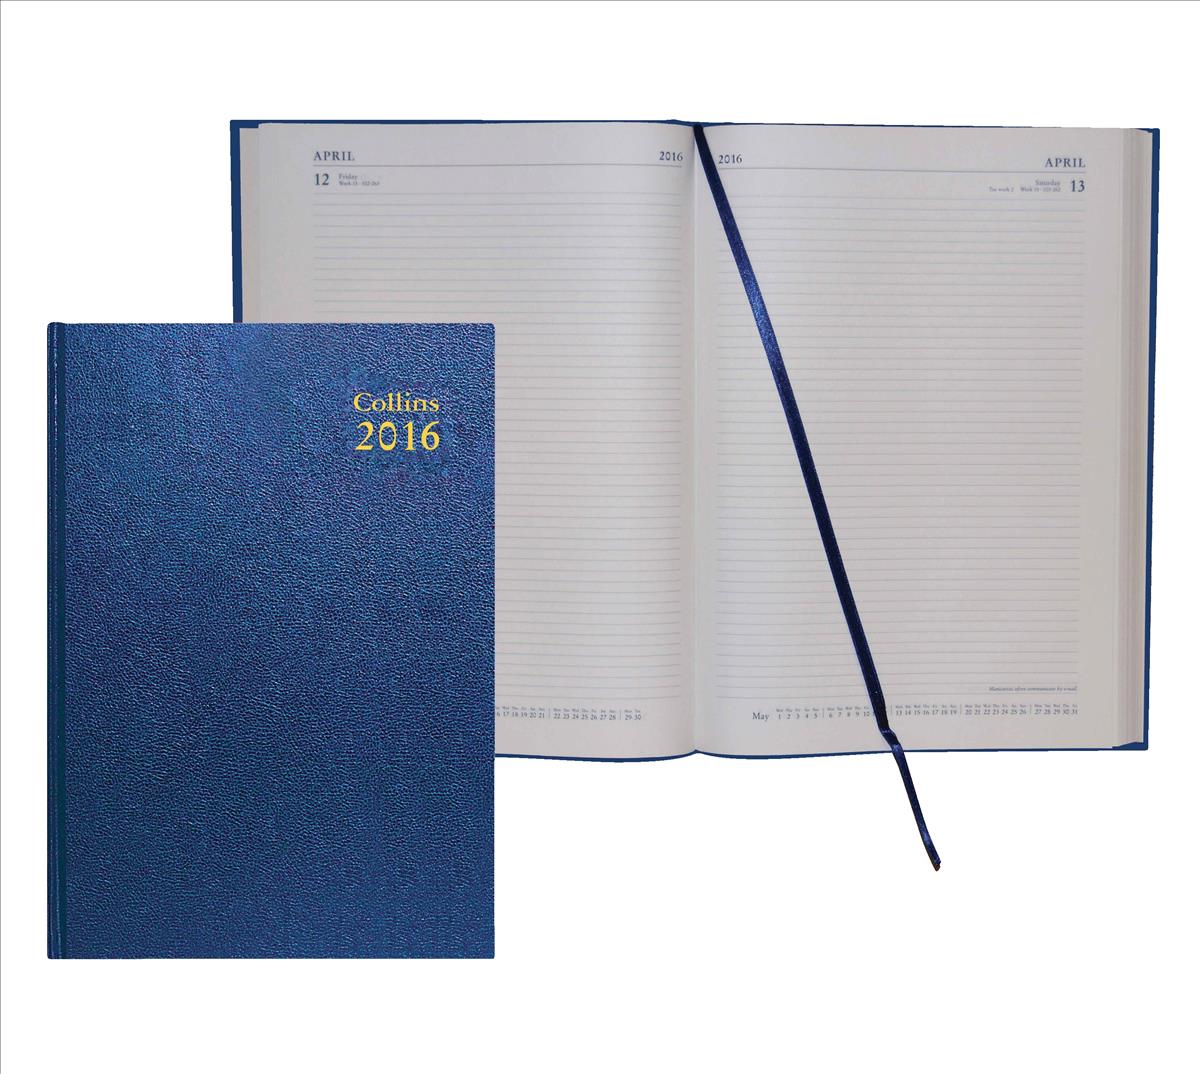 Collins 2016 Dy/Page A4 Diary 44 Blue